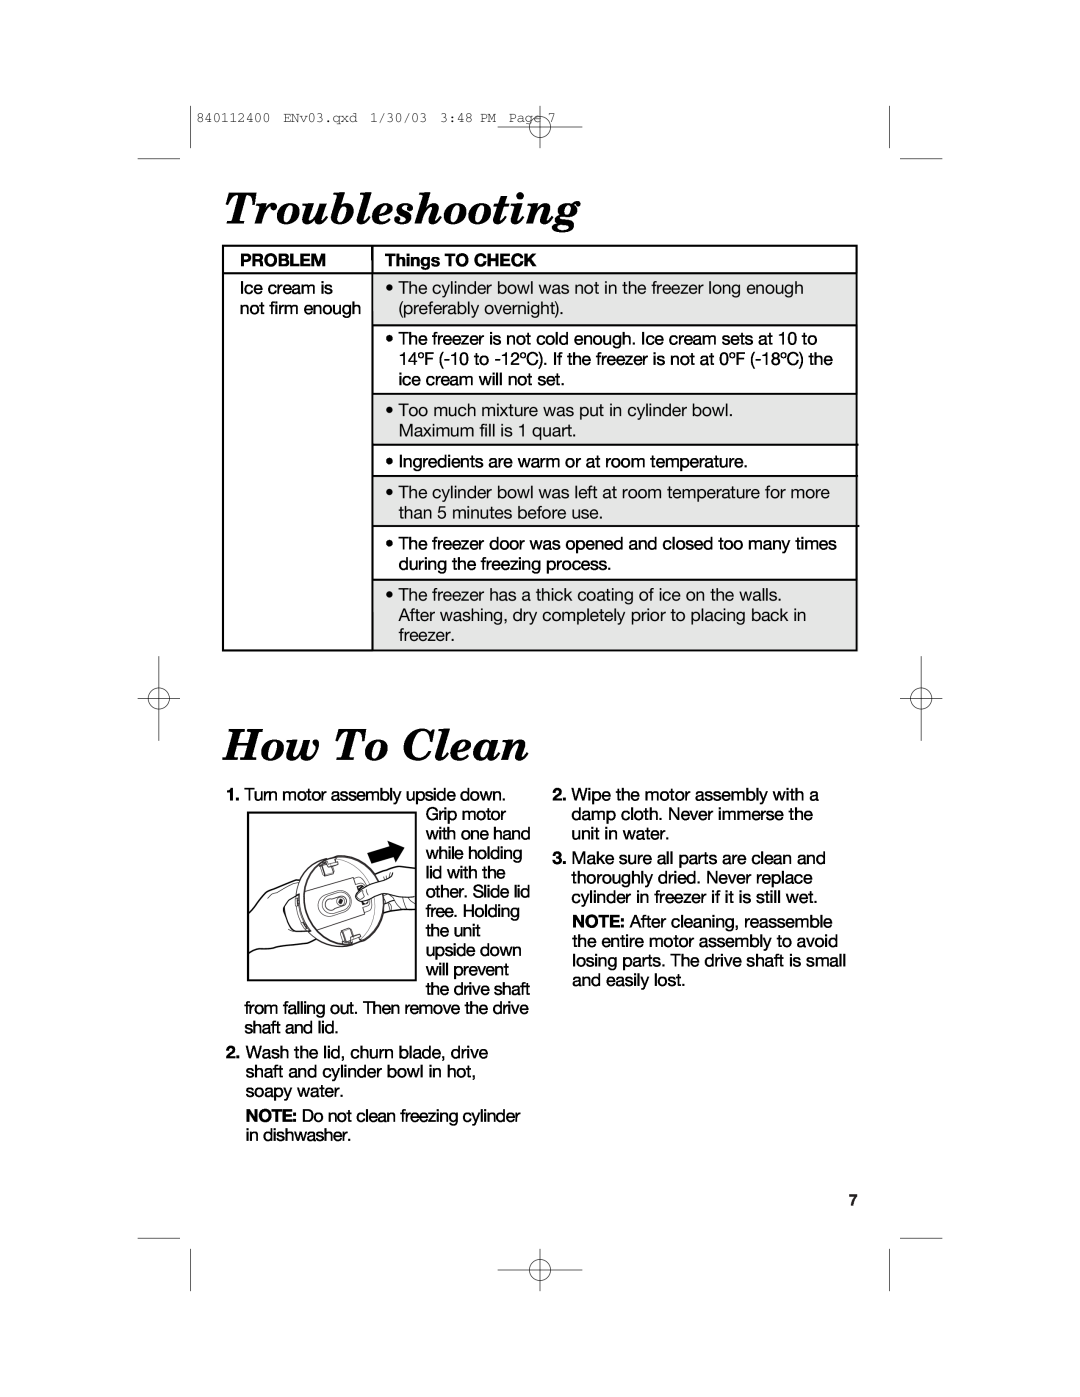 Hamilton Beach 68120 manual Troubleshooting, How To Clean, Problem, Things TO CHECK 